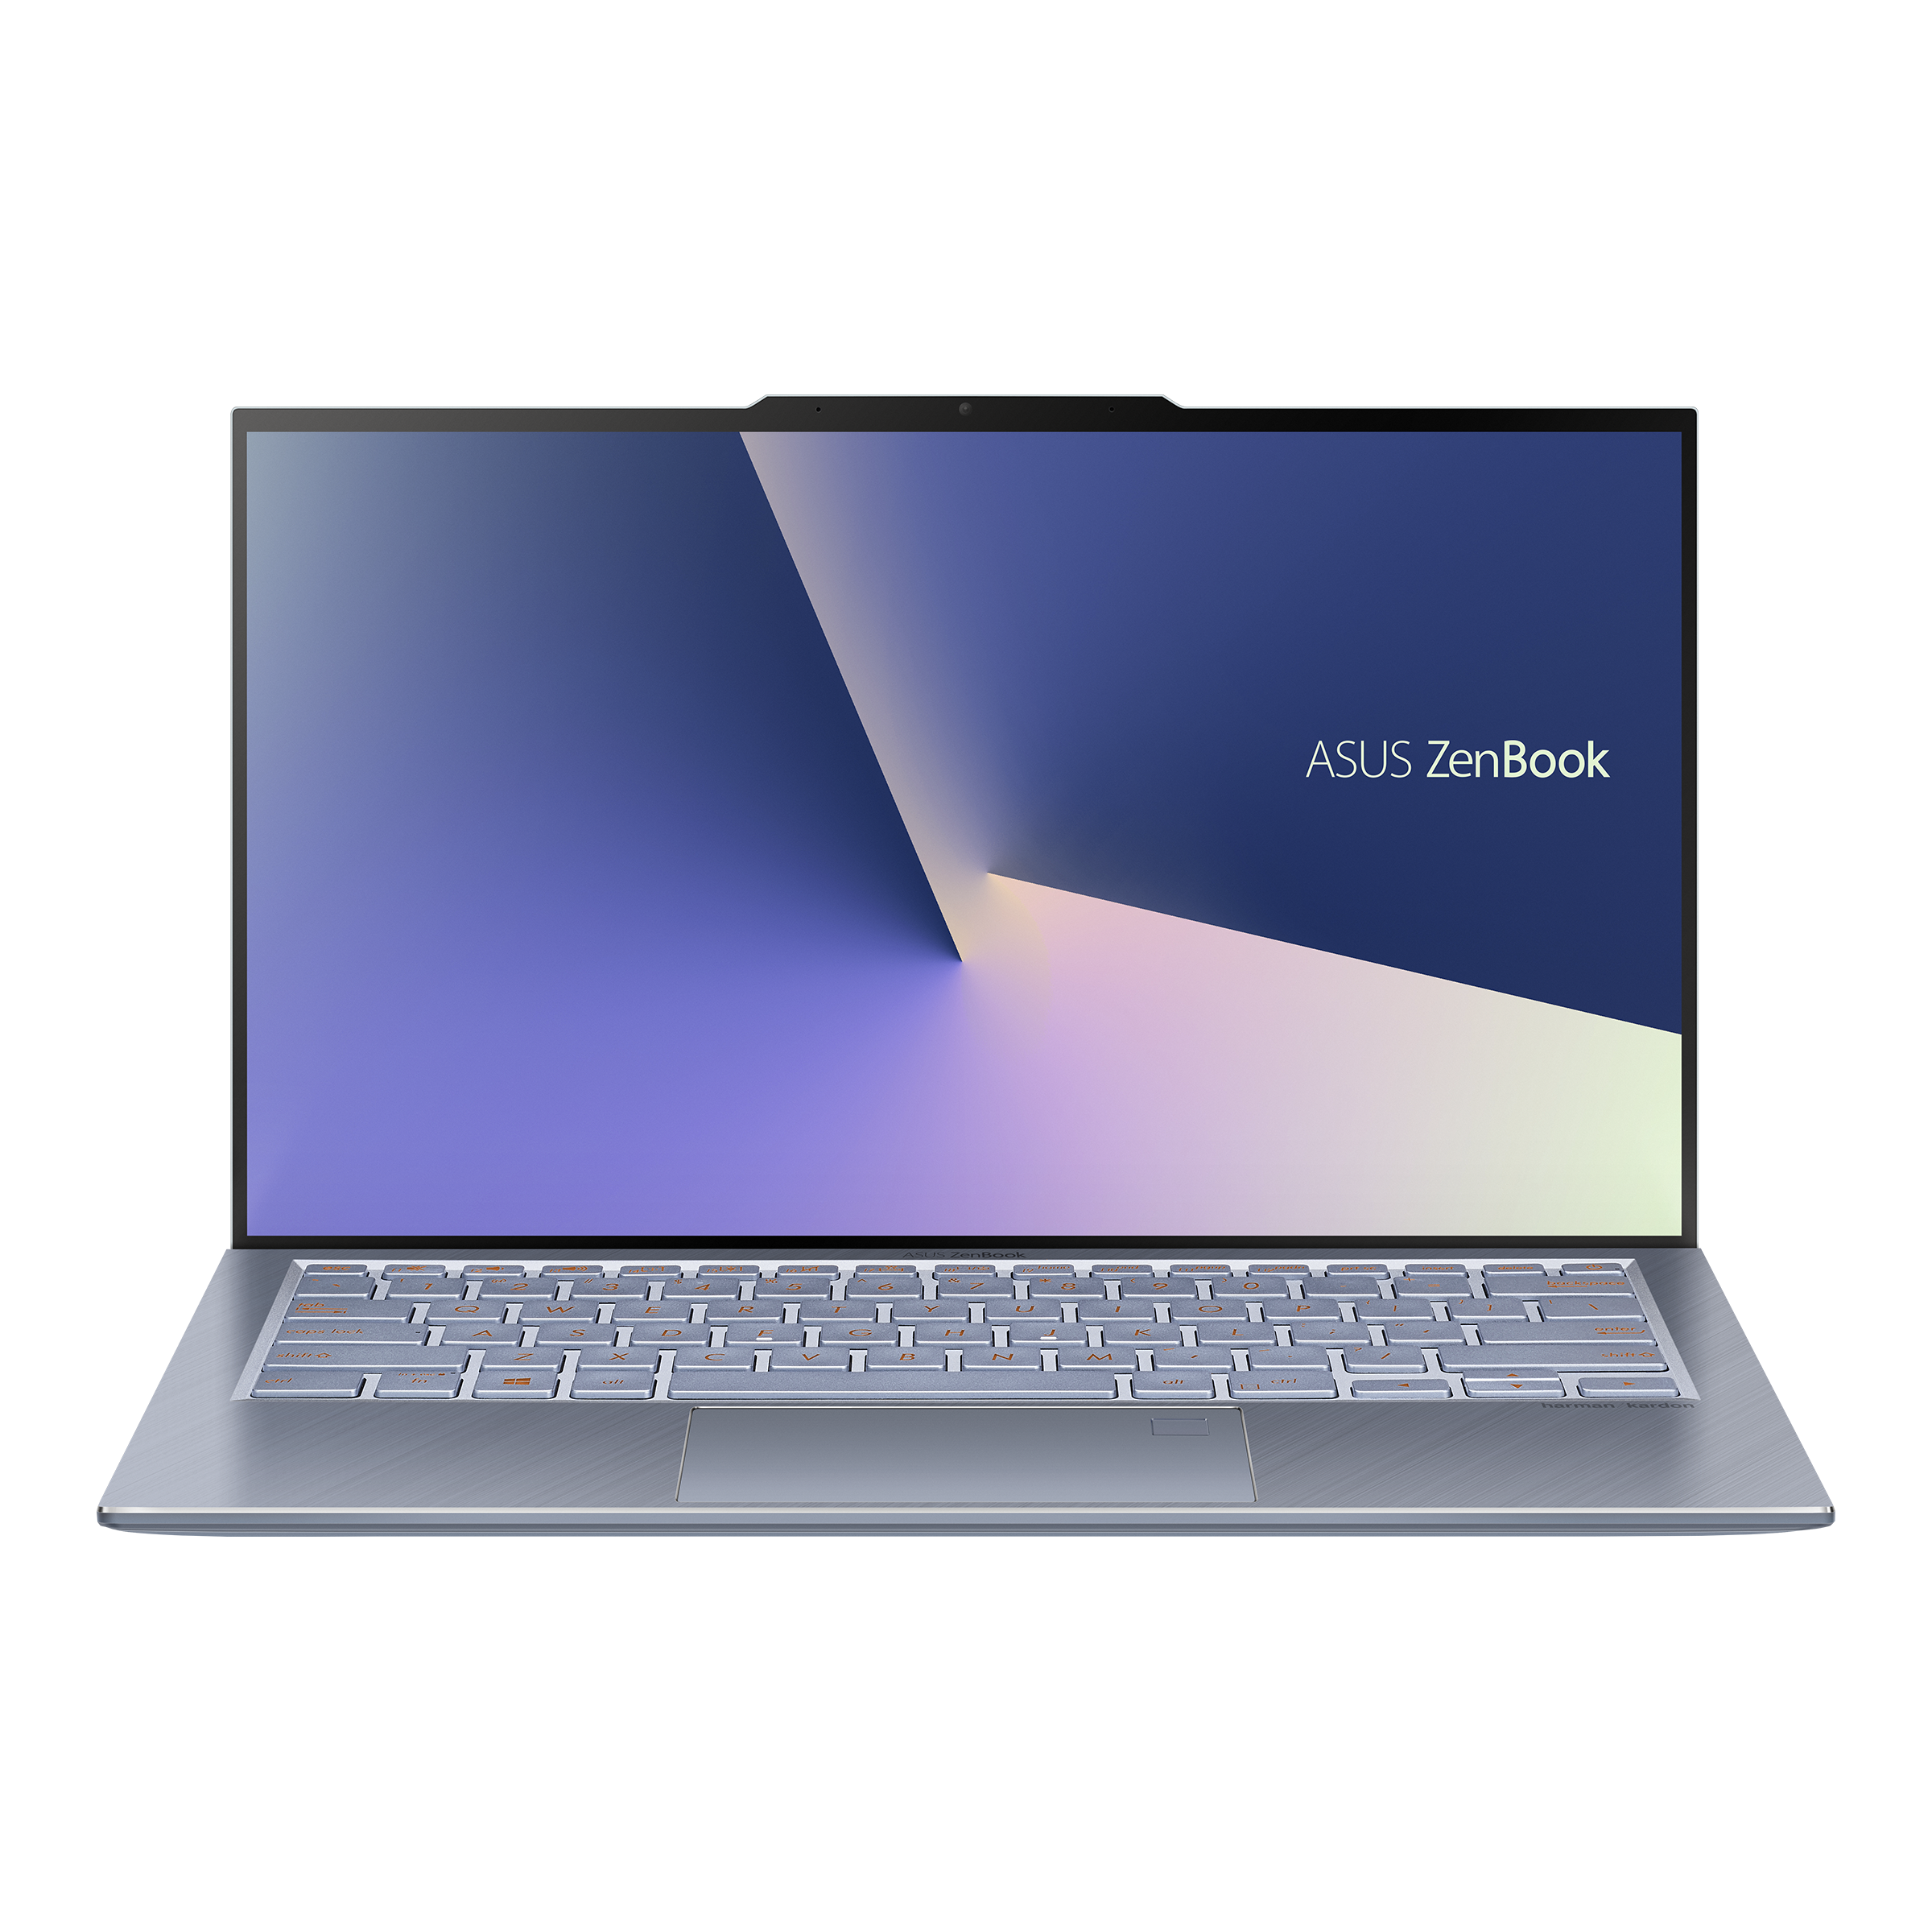 Zenbook S13 UX392｜Laptops For Home｜ASUS Global